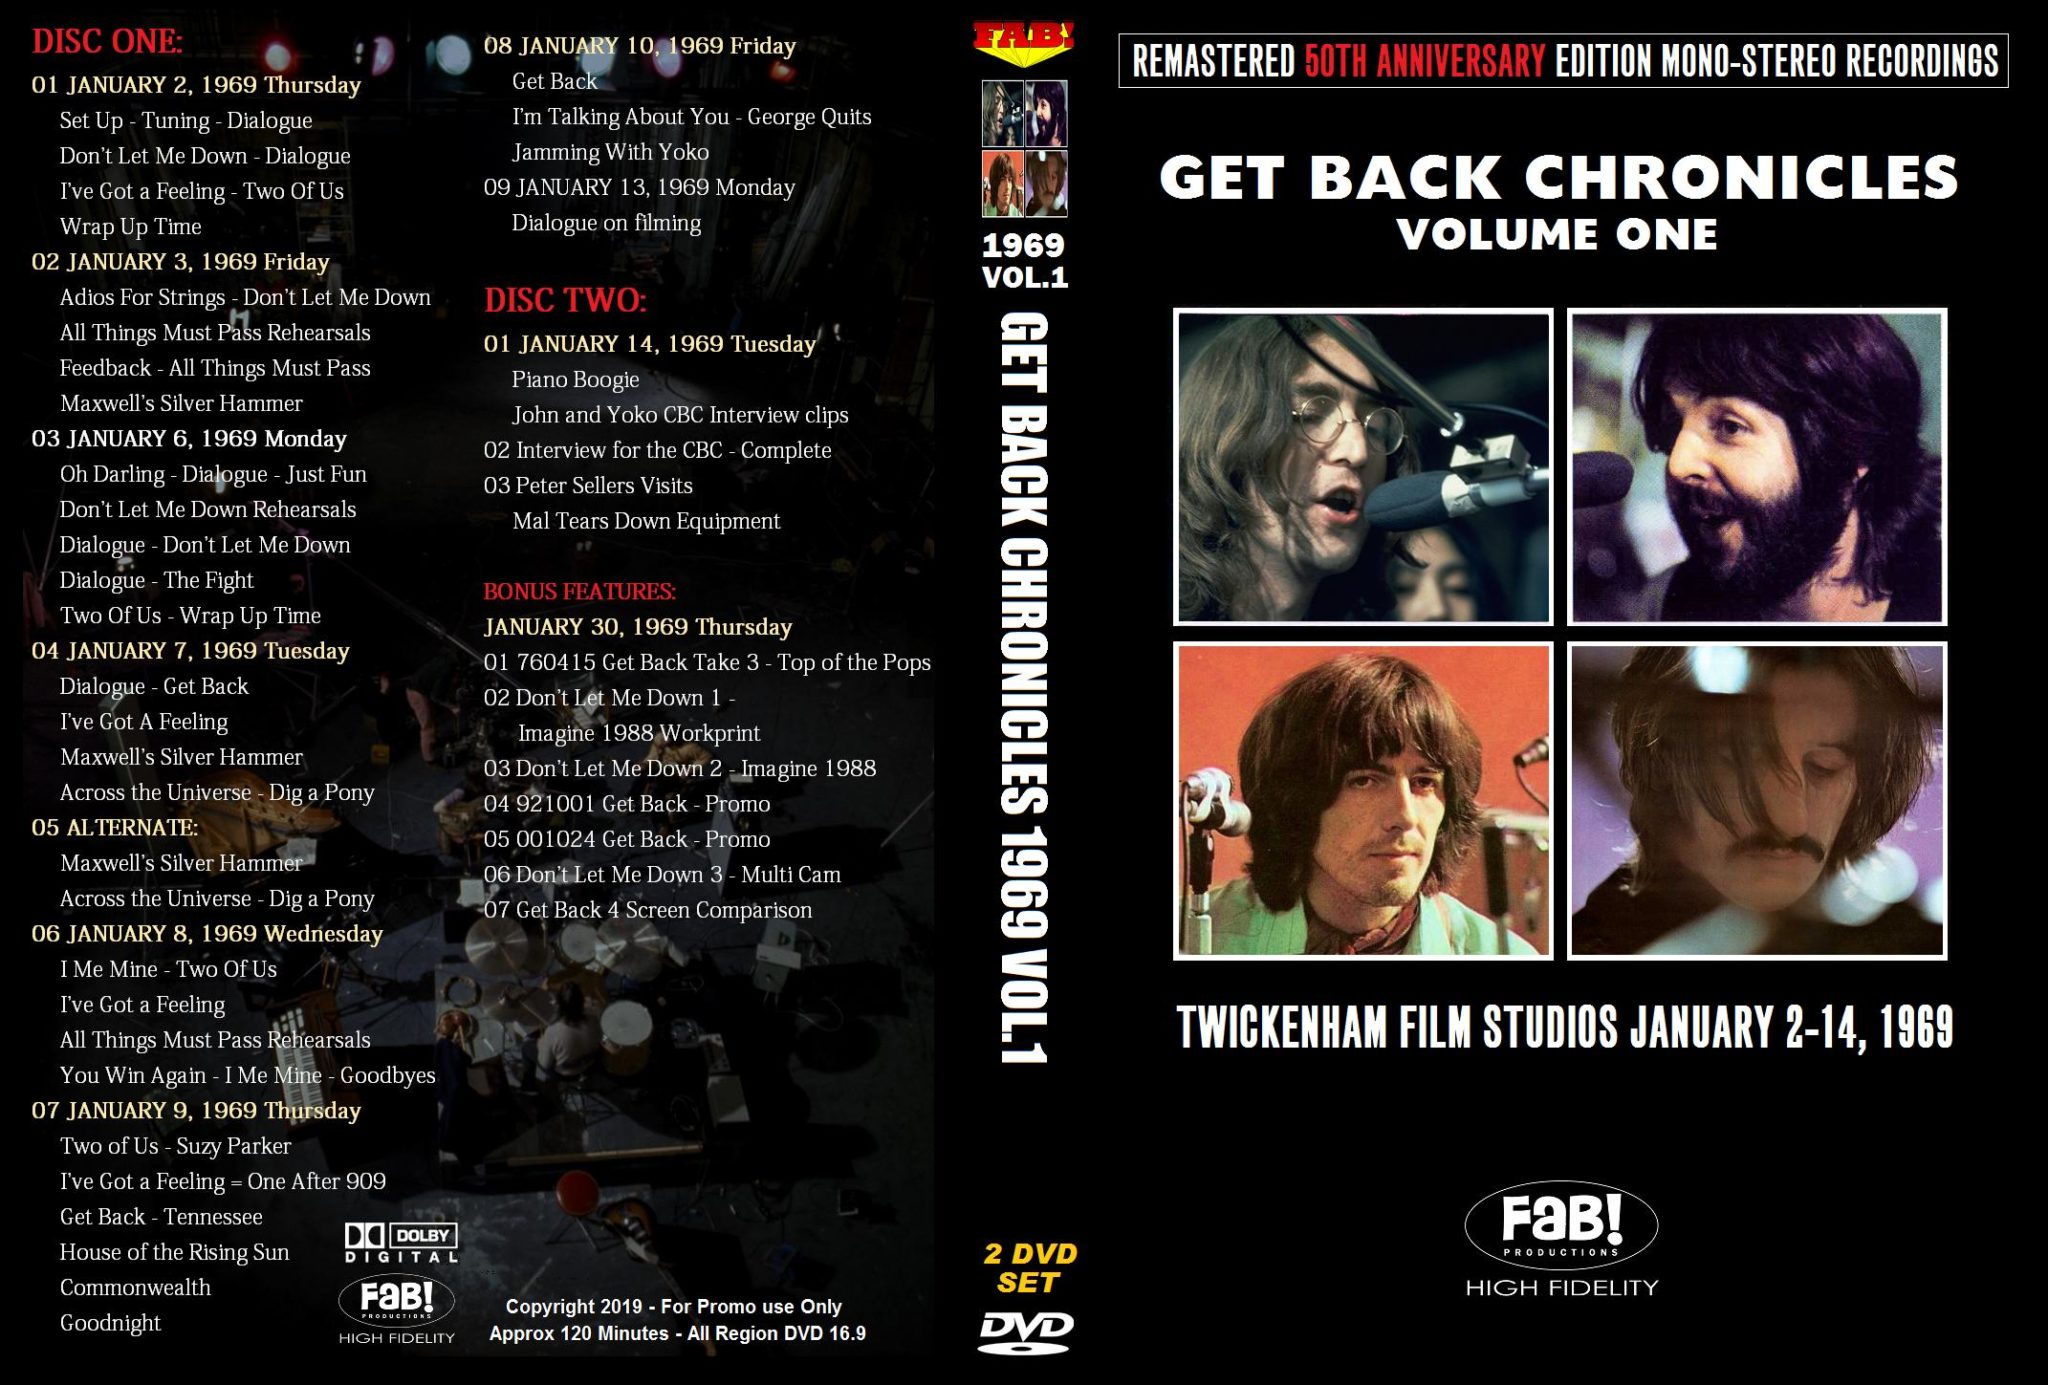 Get back текст. The Beatles get back обложка DVD. The Beatles: get back обложка.